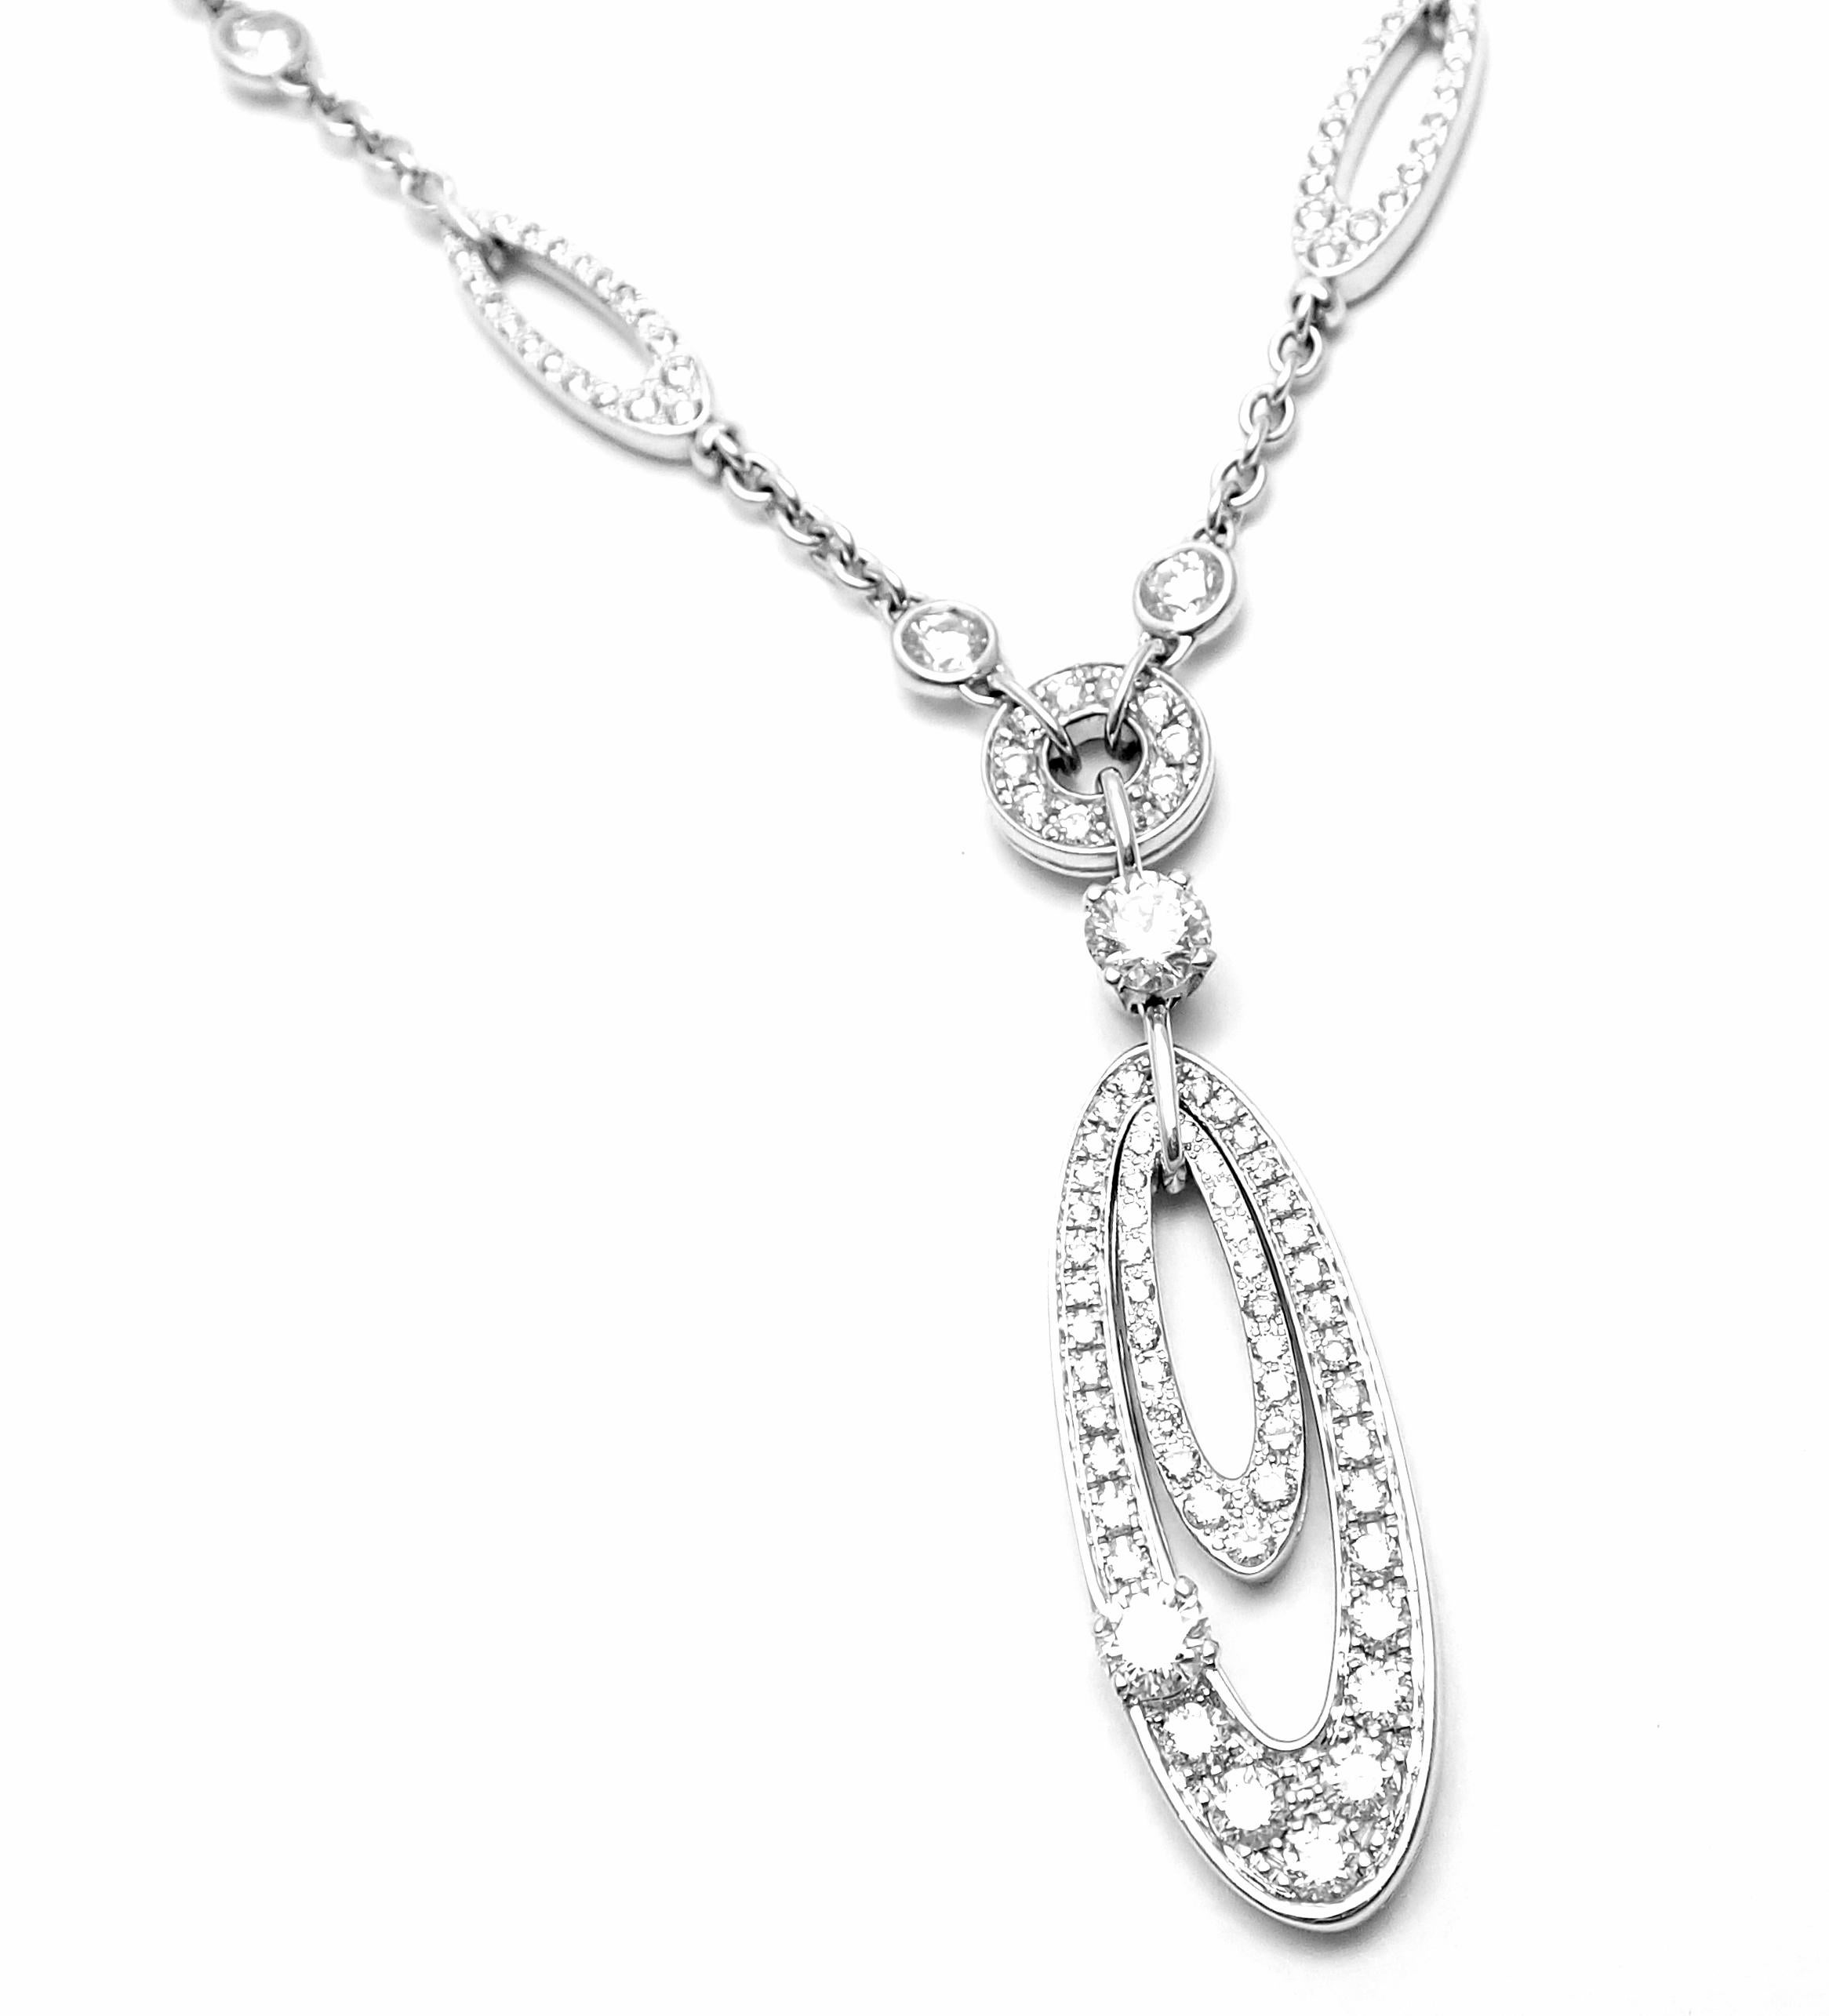 18k White Gold Elisia Diamond Drop Necklace by Bulgari. 
With Round brilliant cut diamonds VVS1 clarity, E color total weight approx. 3.9ct
Details: 
Length: 17.5